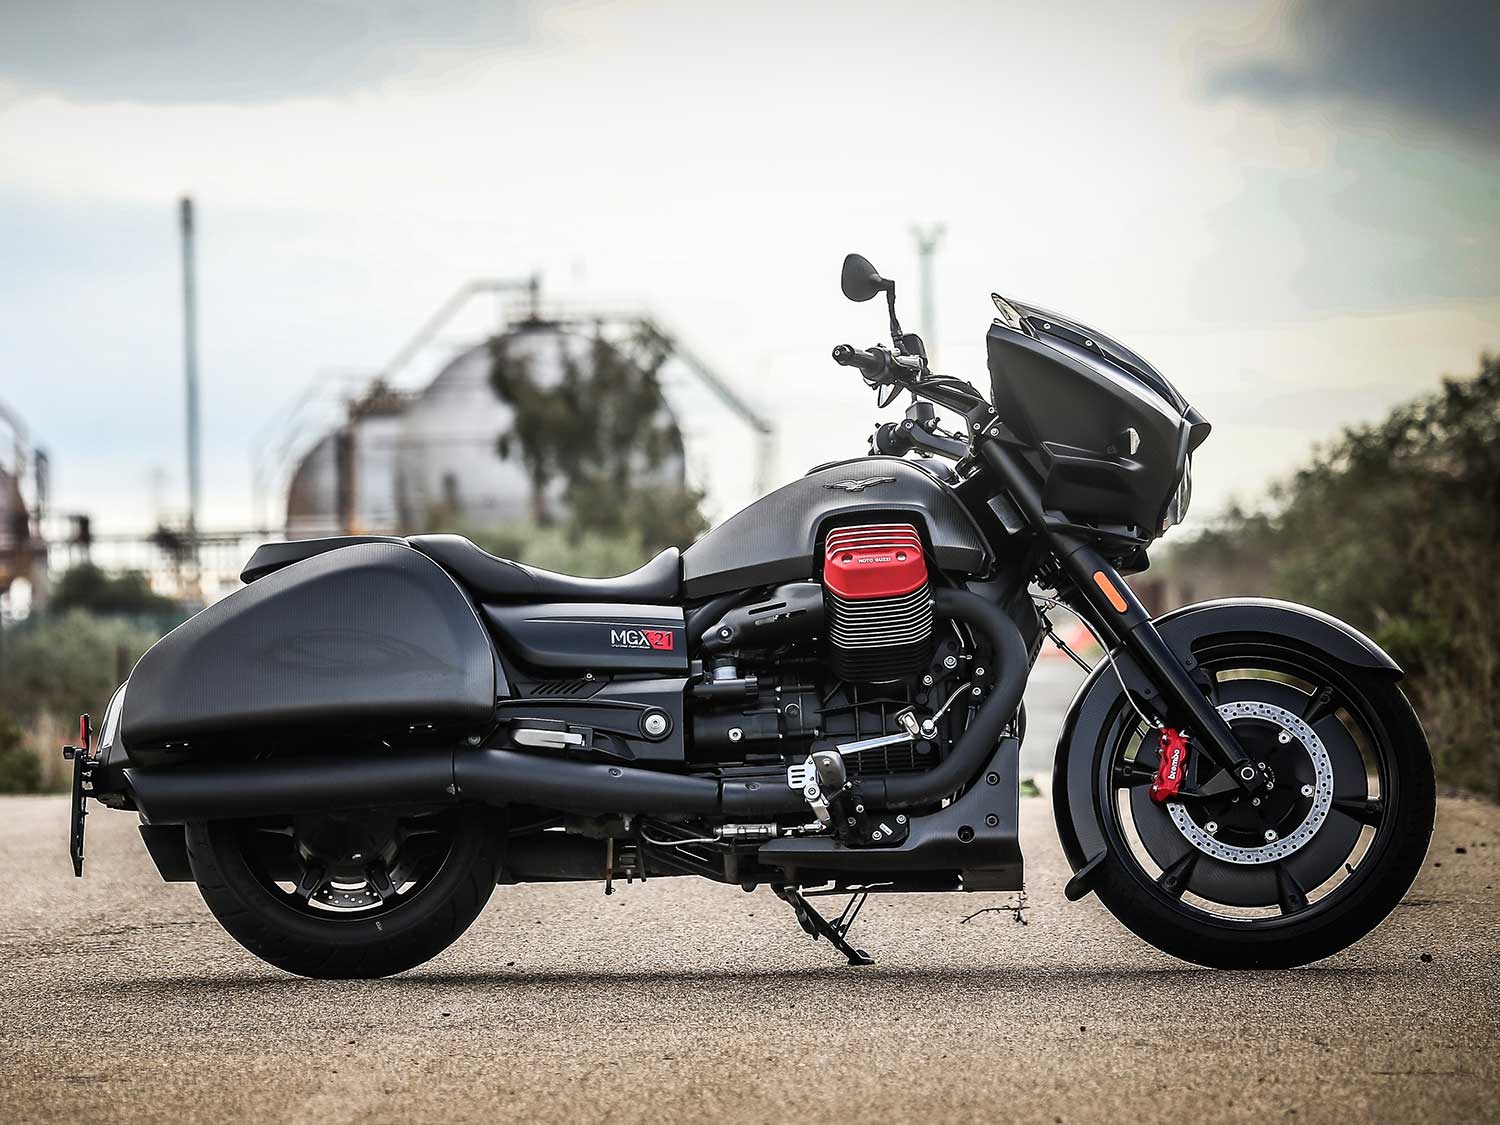 The quick and unusually styled Moto Guzzi MGX-21 definitely stands out from the rest of the traditional bagger crowd.